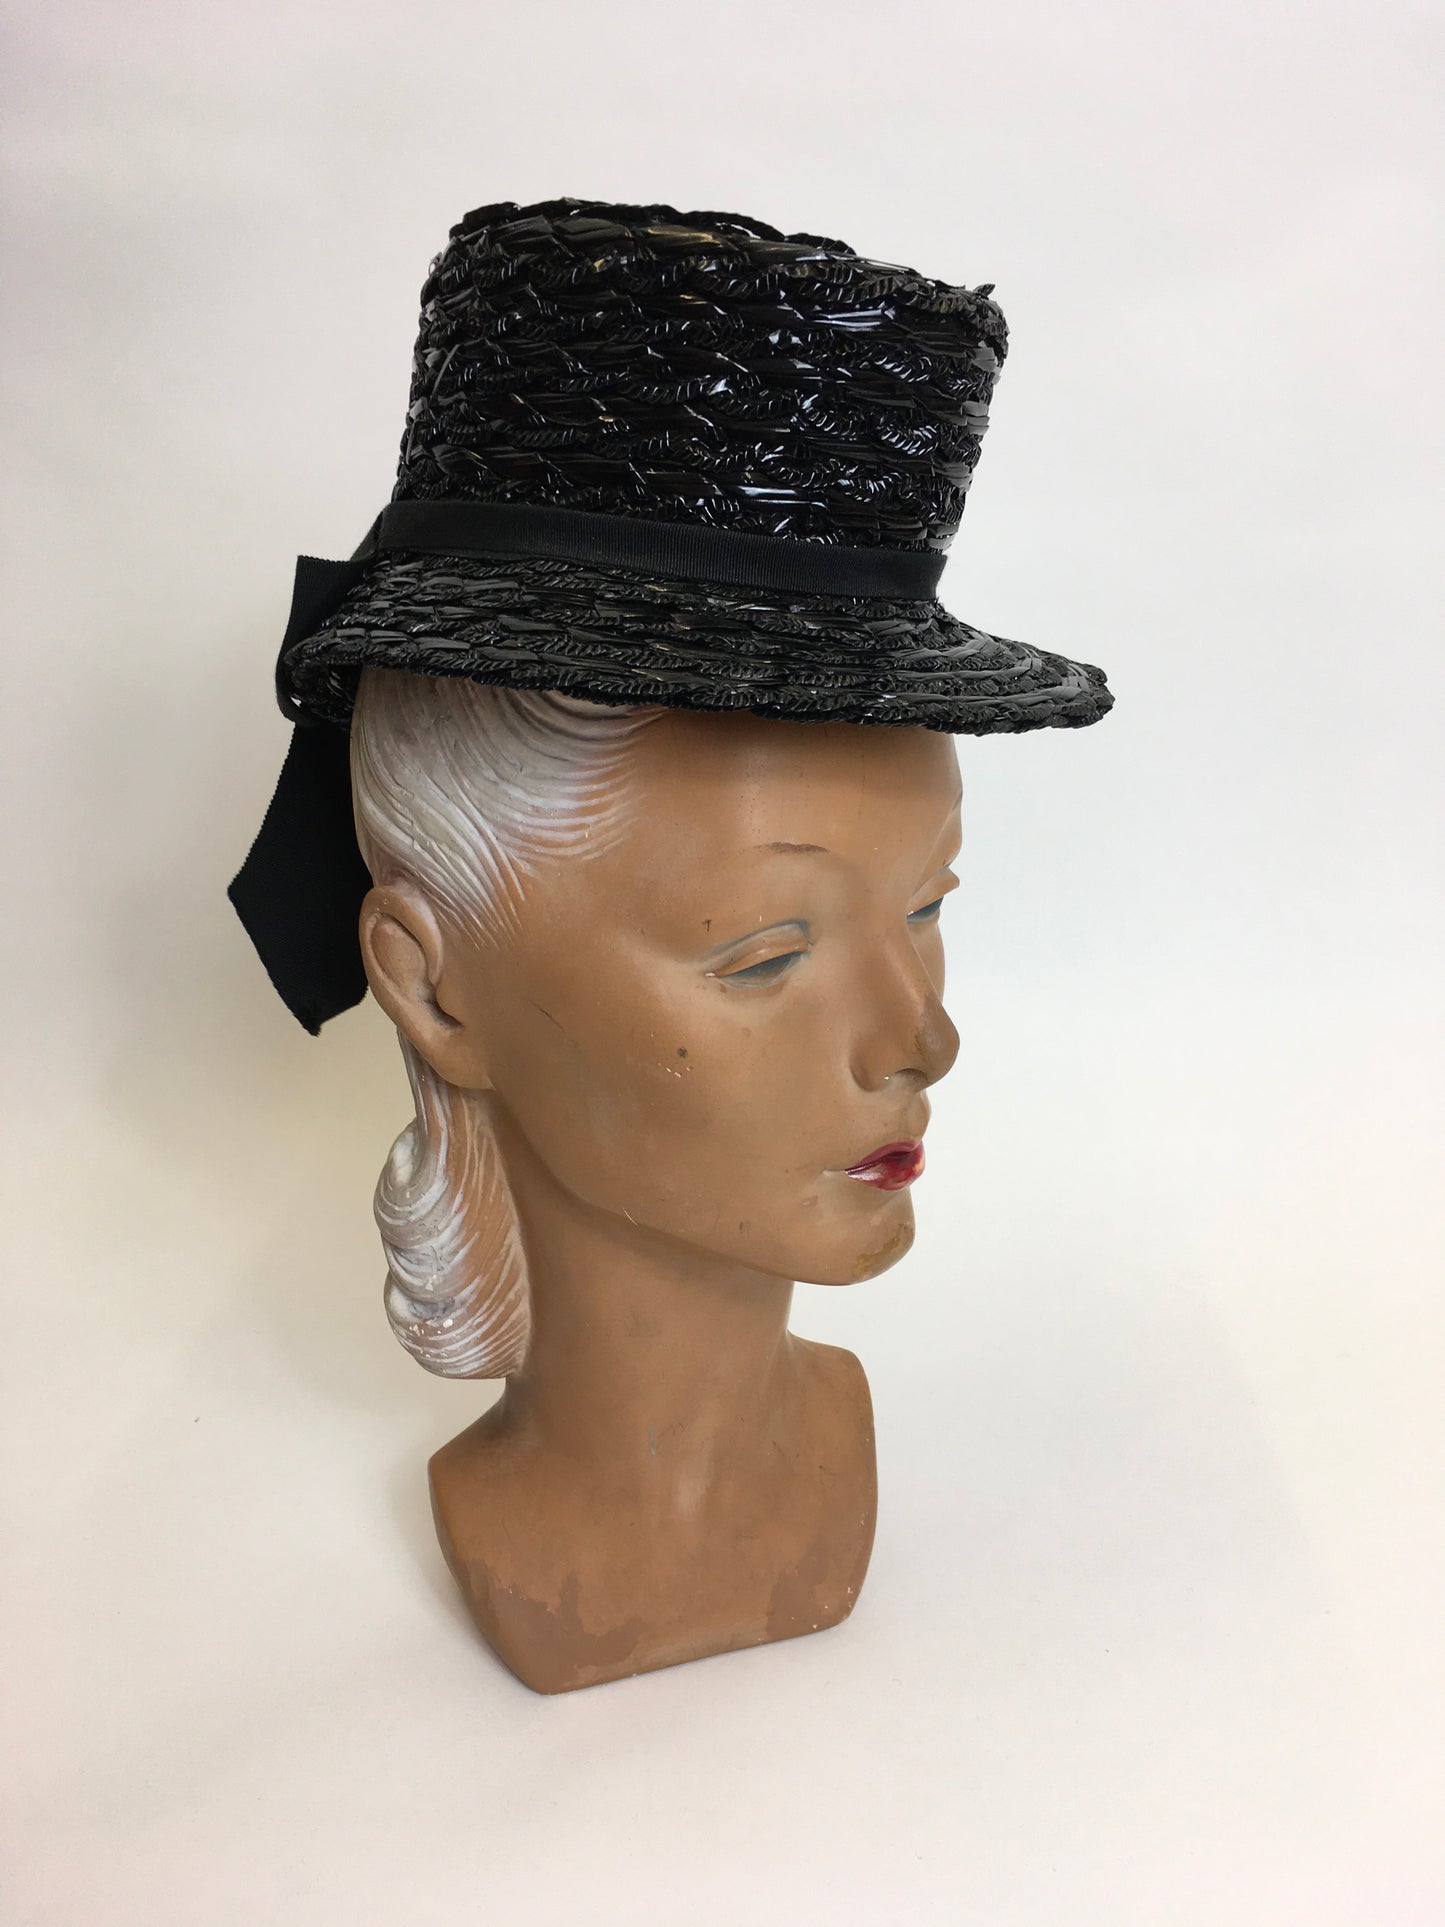 Original 1940’s Black American Topper Hat - Fabulous Iconic Shape With Grosgrain Bow